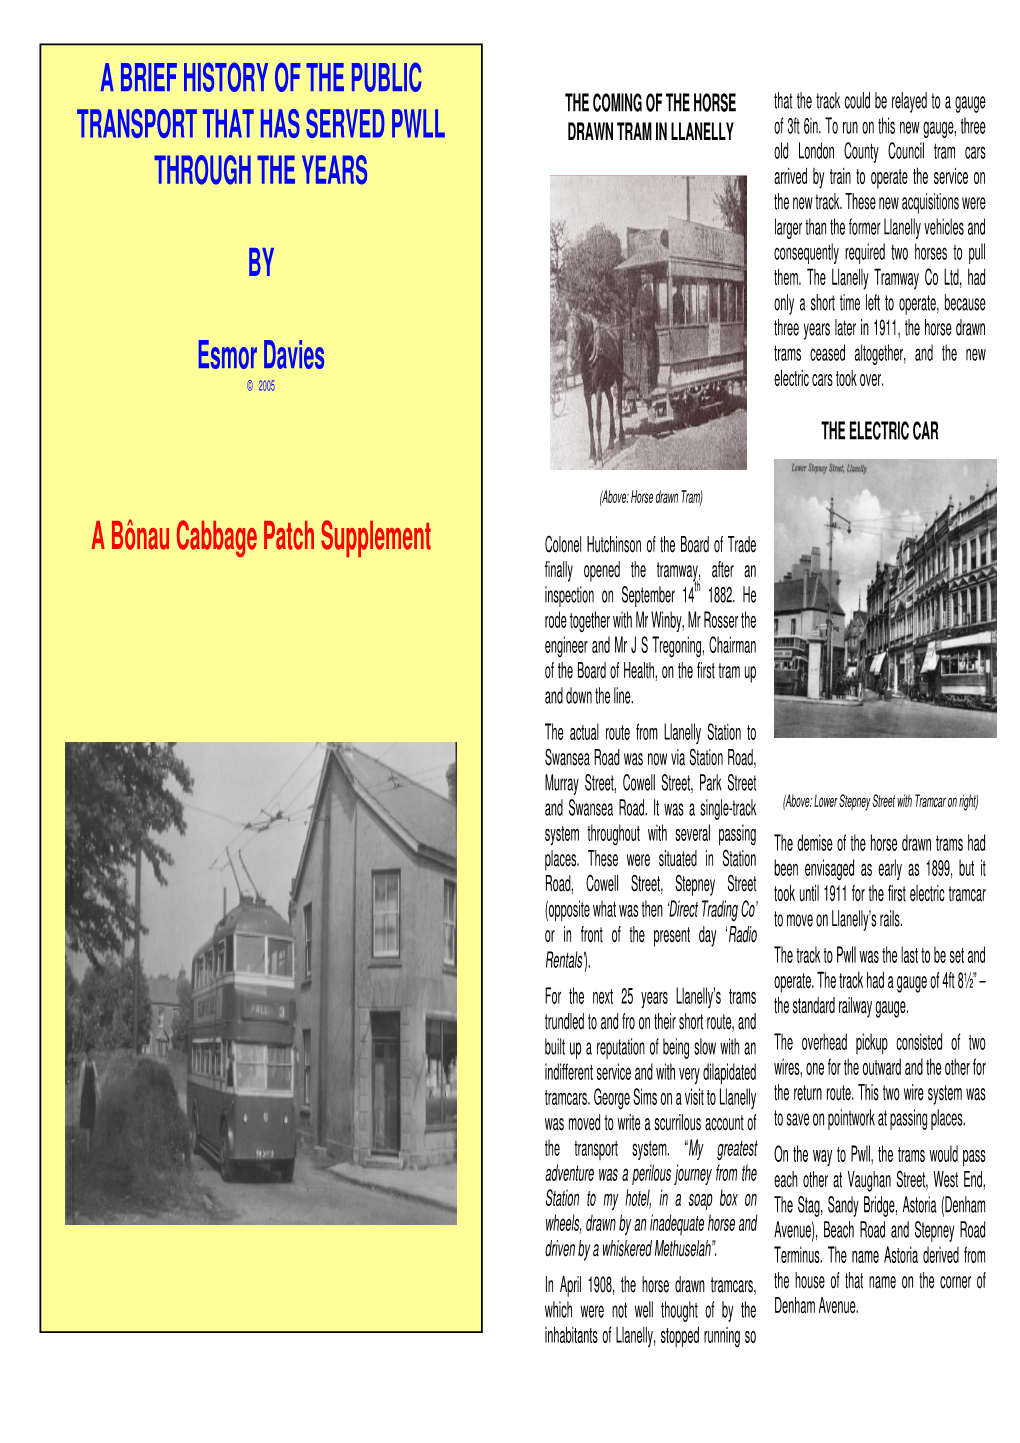 A BRIEF HISTORY of the PUBLIC TRANSPORT THAT HAS SERVED PWLL THROUGH the YEARS by Esmor Davies a Bônau Cabbage Patch Supplemen